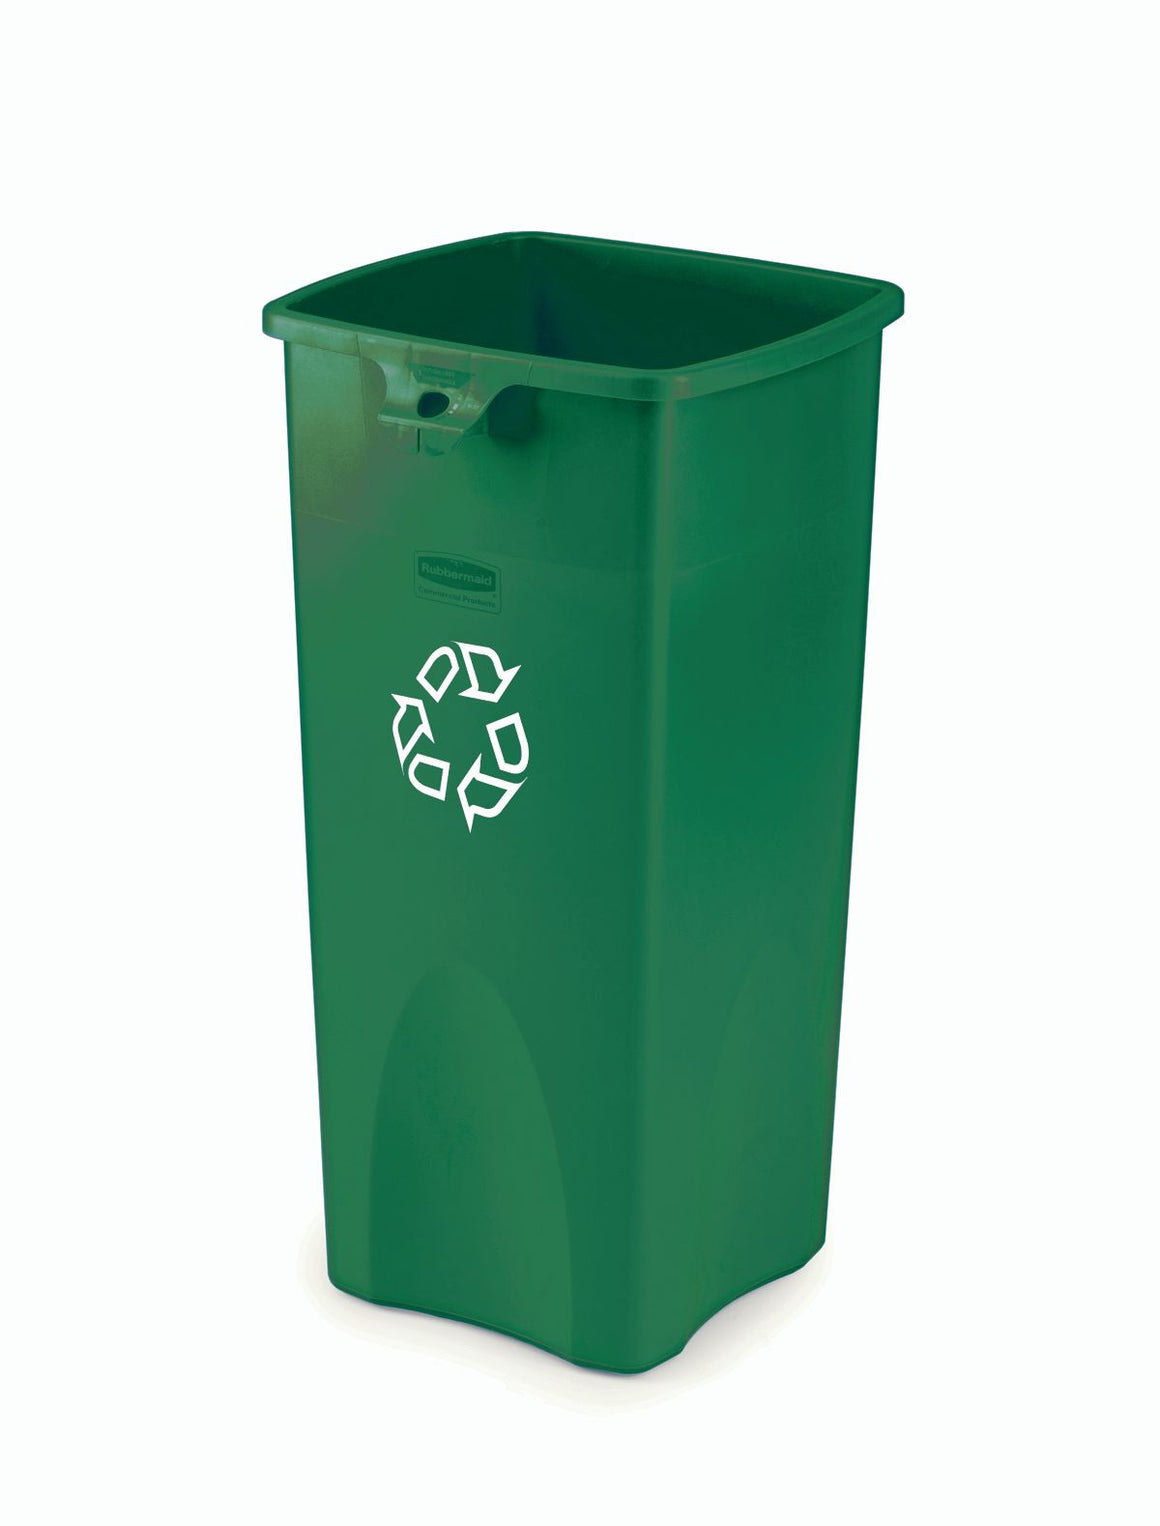 SQ CONTAINER 23gal "RECYCLING" GREEN